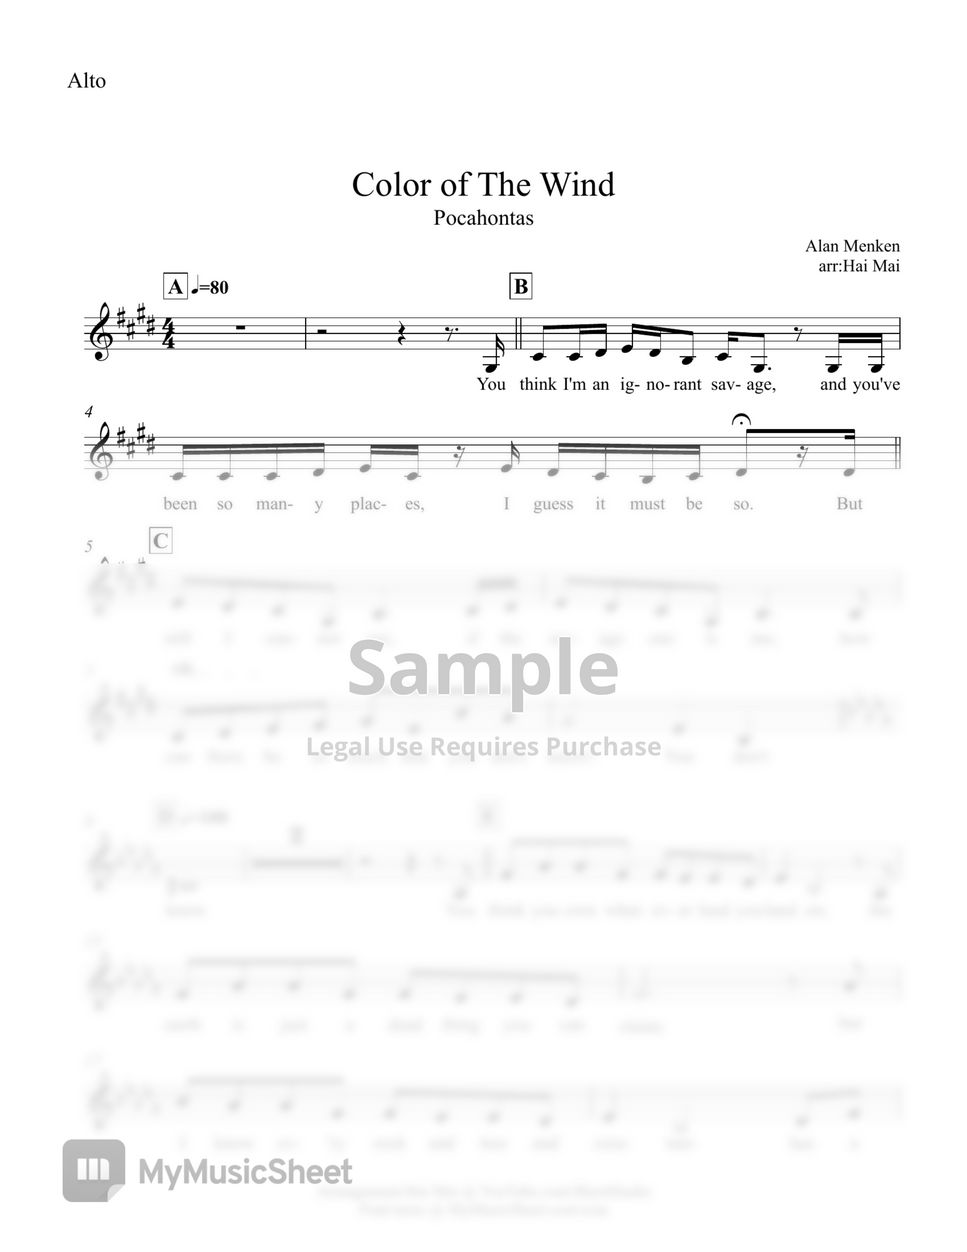 Alan Menken - Color of The Wind(Pocahontas) for Orchestra and Singer - Set of Part by Hai Mai